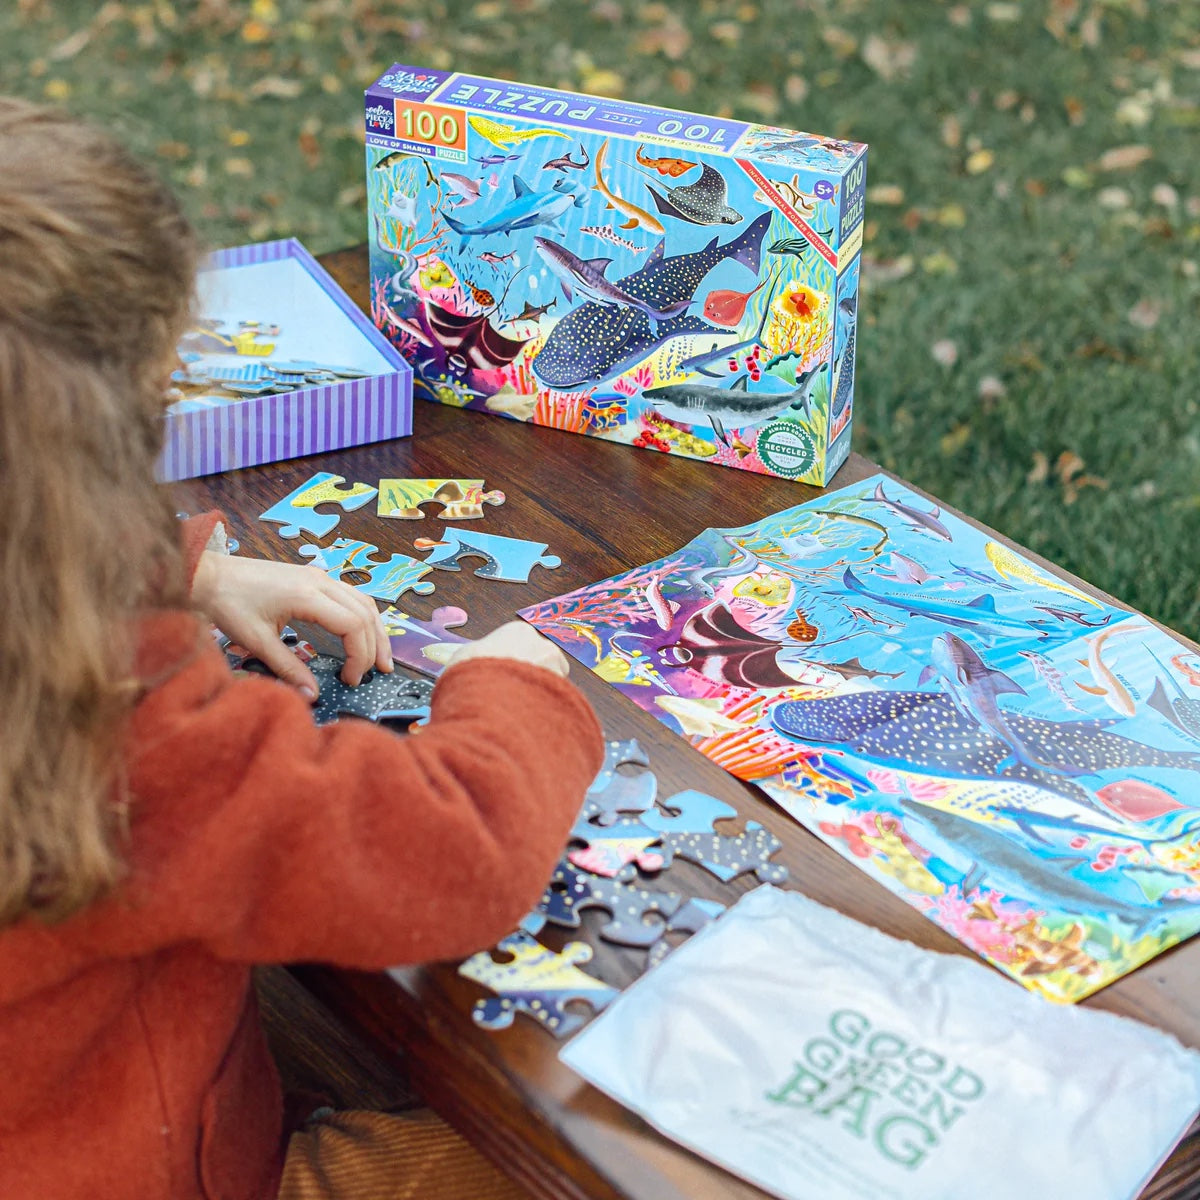 Child wearing an orange sweater making 100-piece Love of Sharks puzzle on a wooden table outside